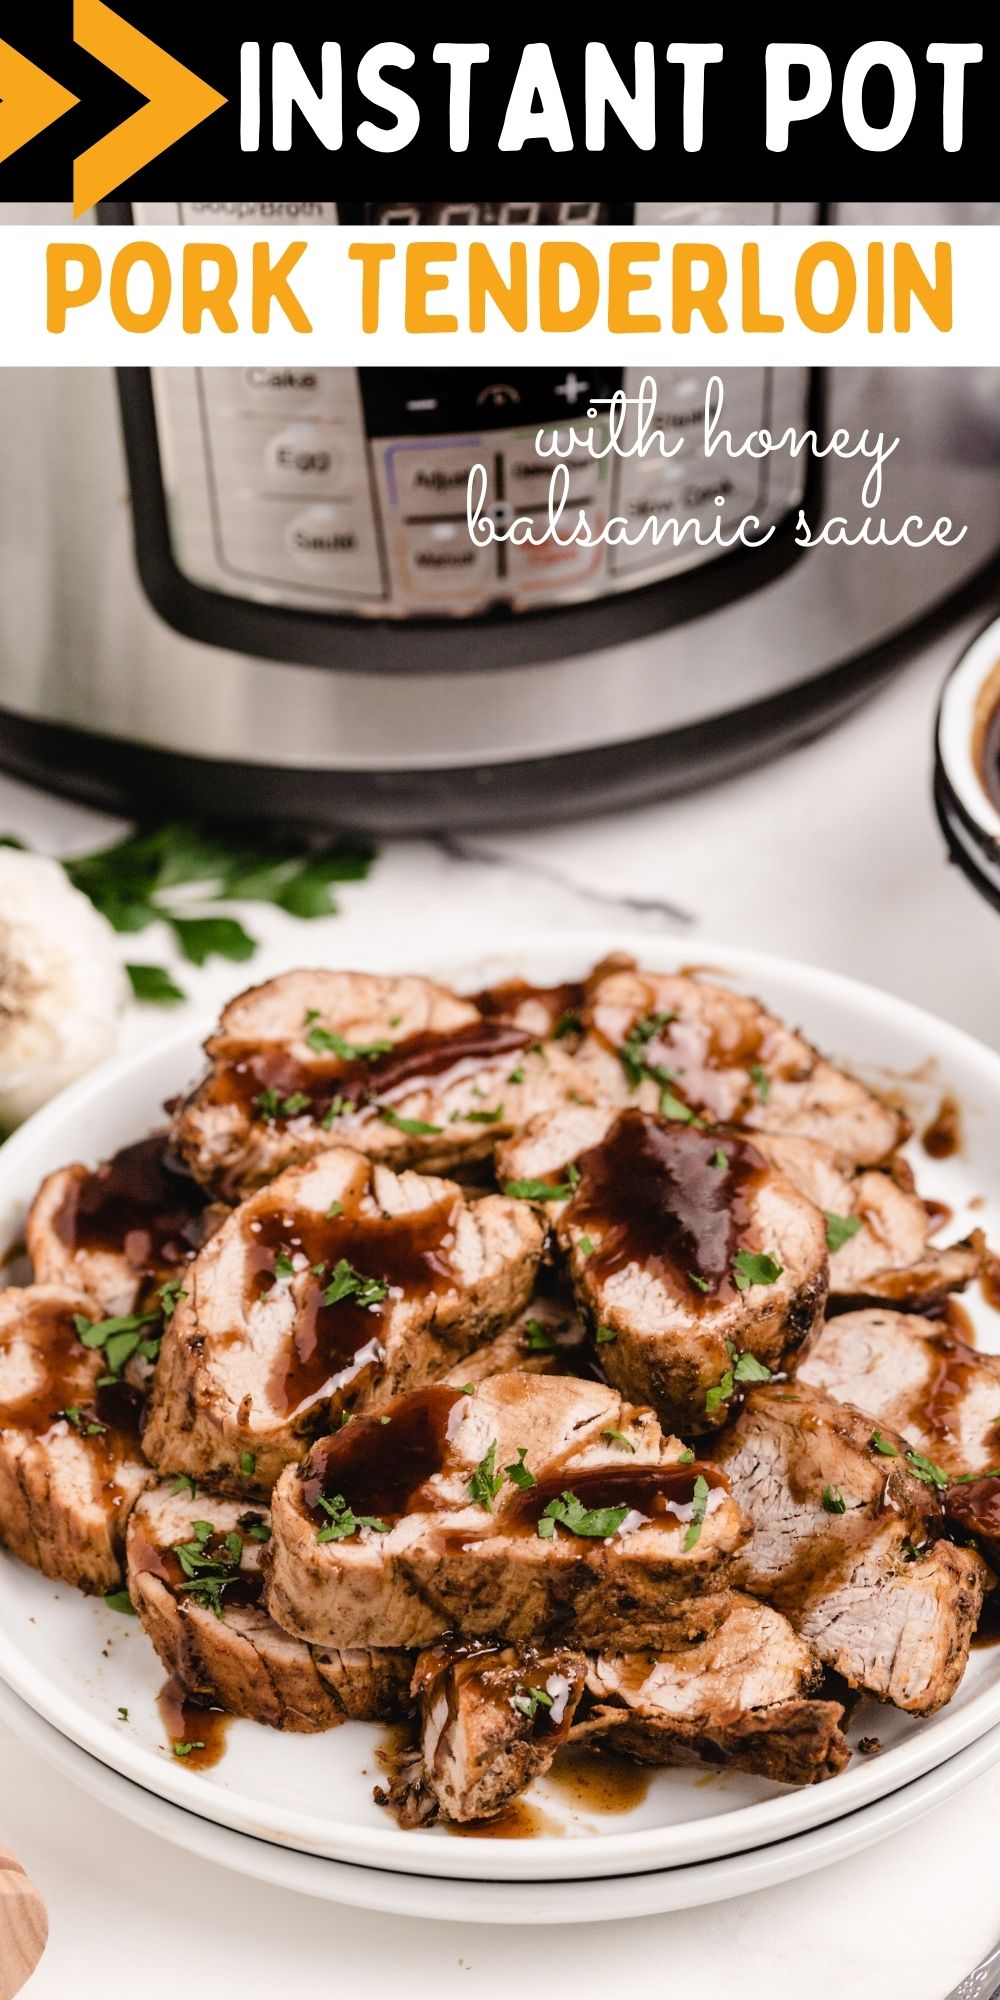 This Instant Pot Pork Tenderloin with Honey Balsamic Sauce recipe is an easy and healthy meal for any night of the week. via @familyfresh